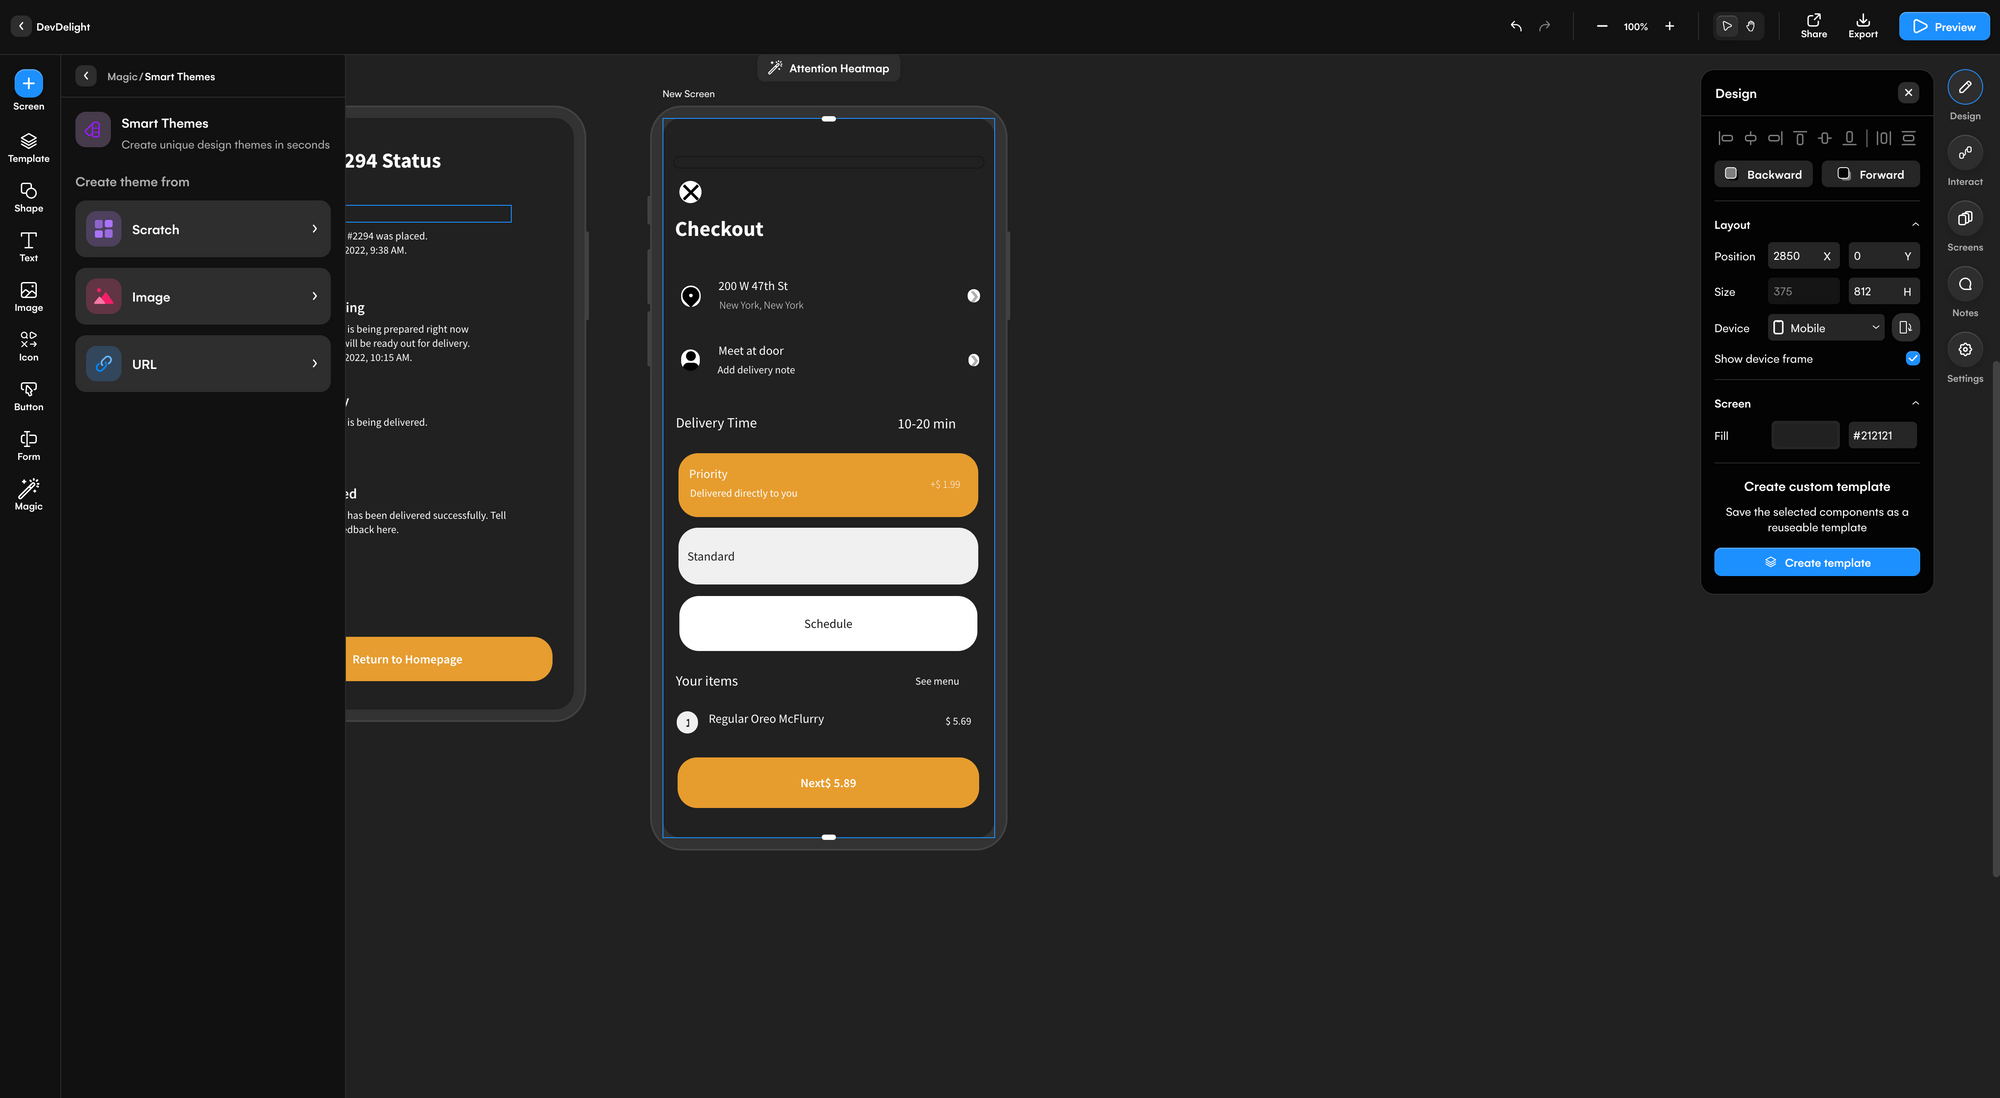 Mobile app checkout screen in black and yellow